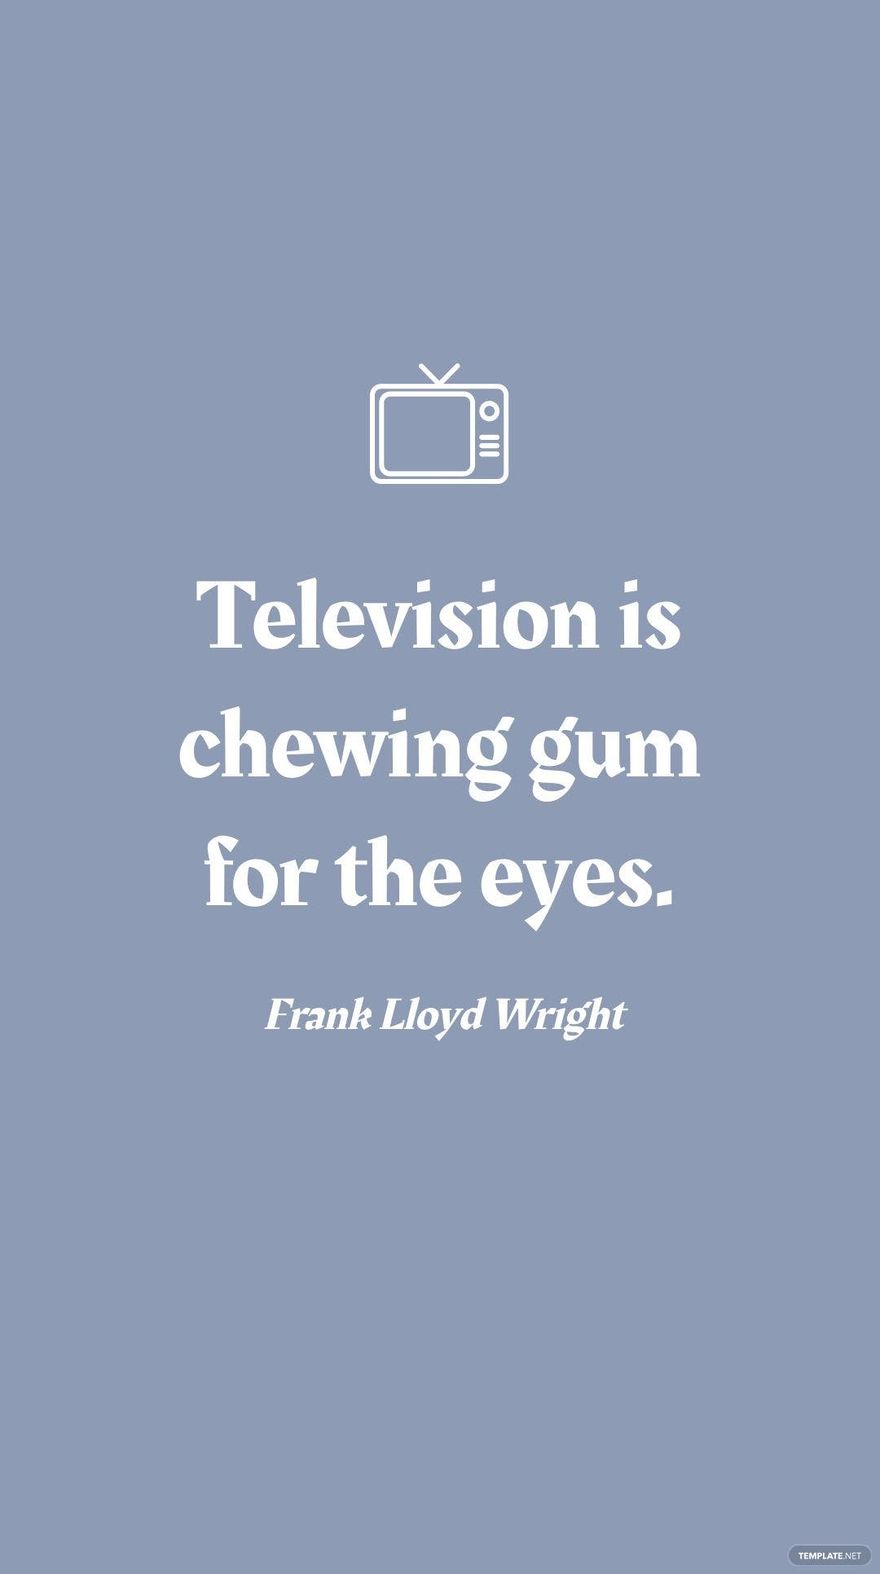 Free Frank Lloyd Wright - Television is chewing gum for the eyes. in JPG